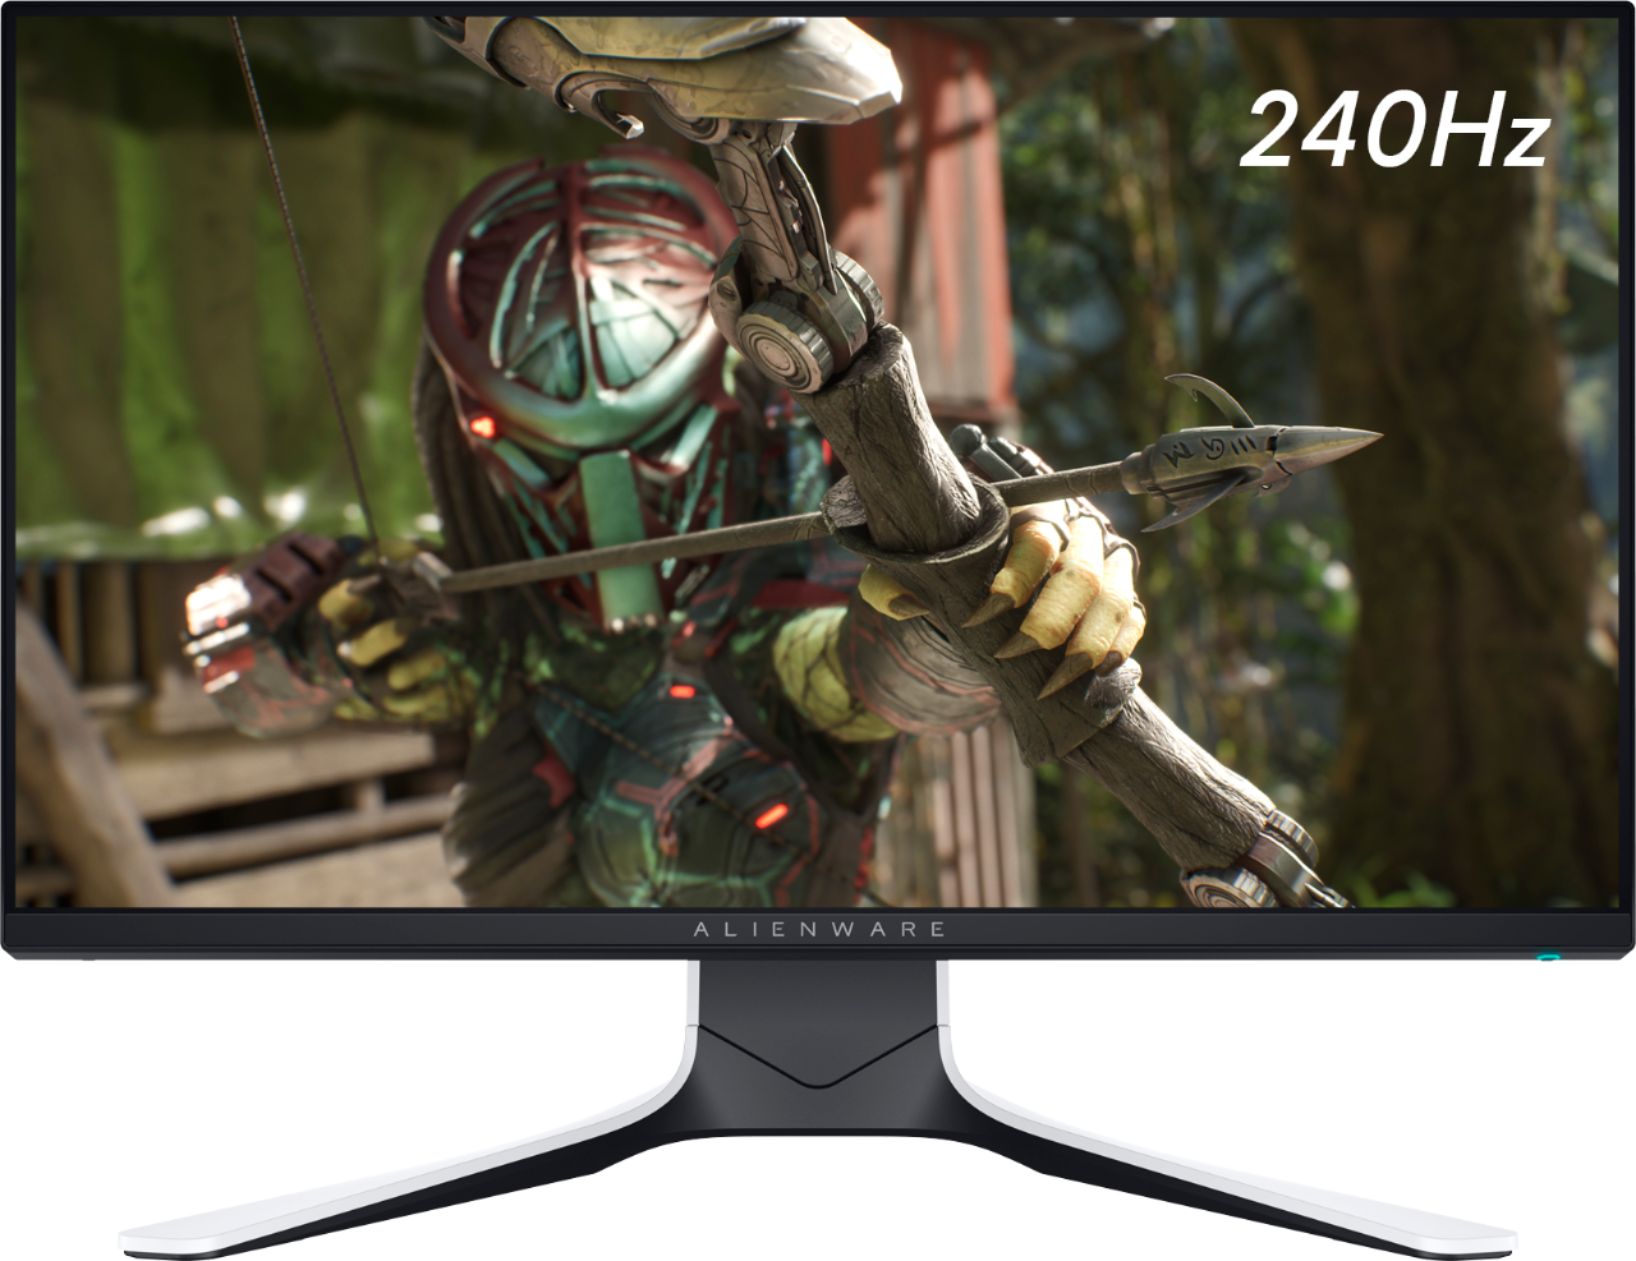 Alienware AW2521HFL 24.5" IPS LED FHD FreeSync and G-SYNC Compatible Monitor (DisplayPort, HDMI, USB) Lunar Light RNHC4 - $269.00 at Best Buy